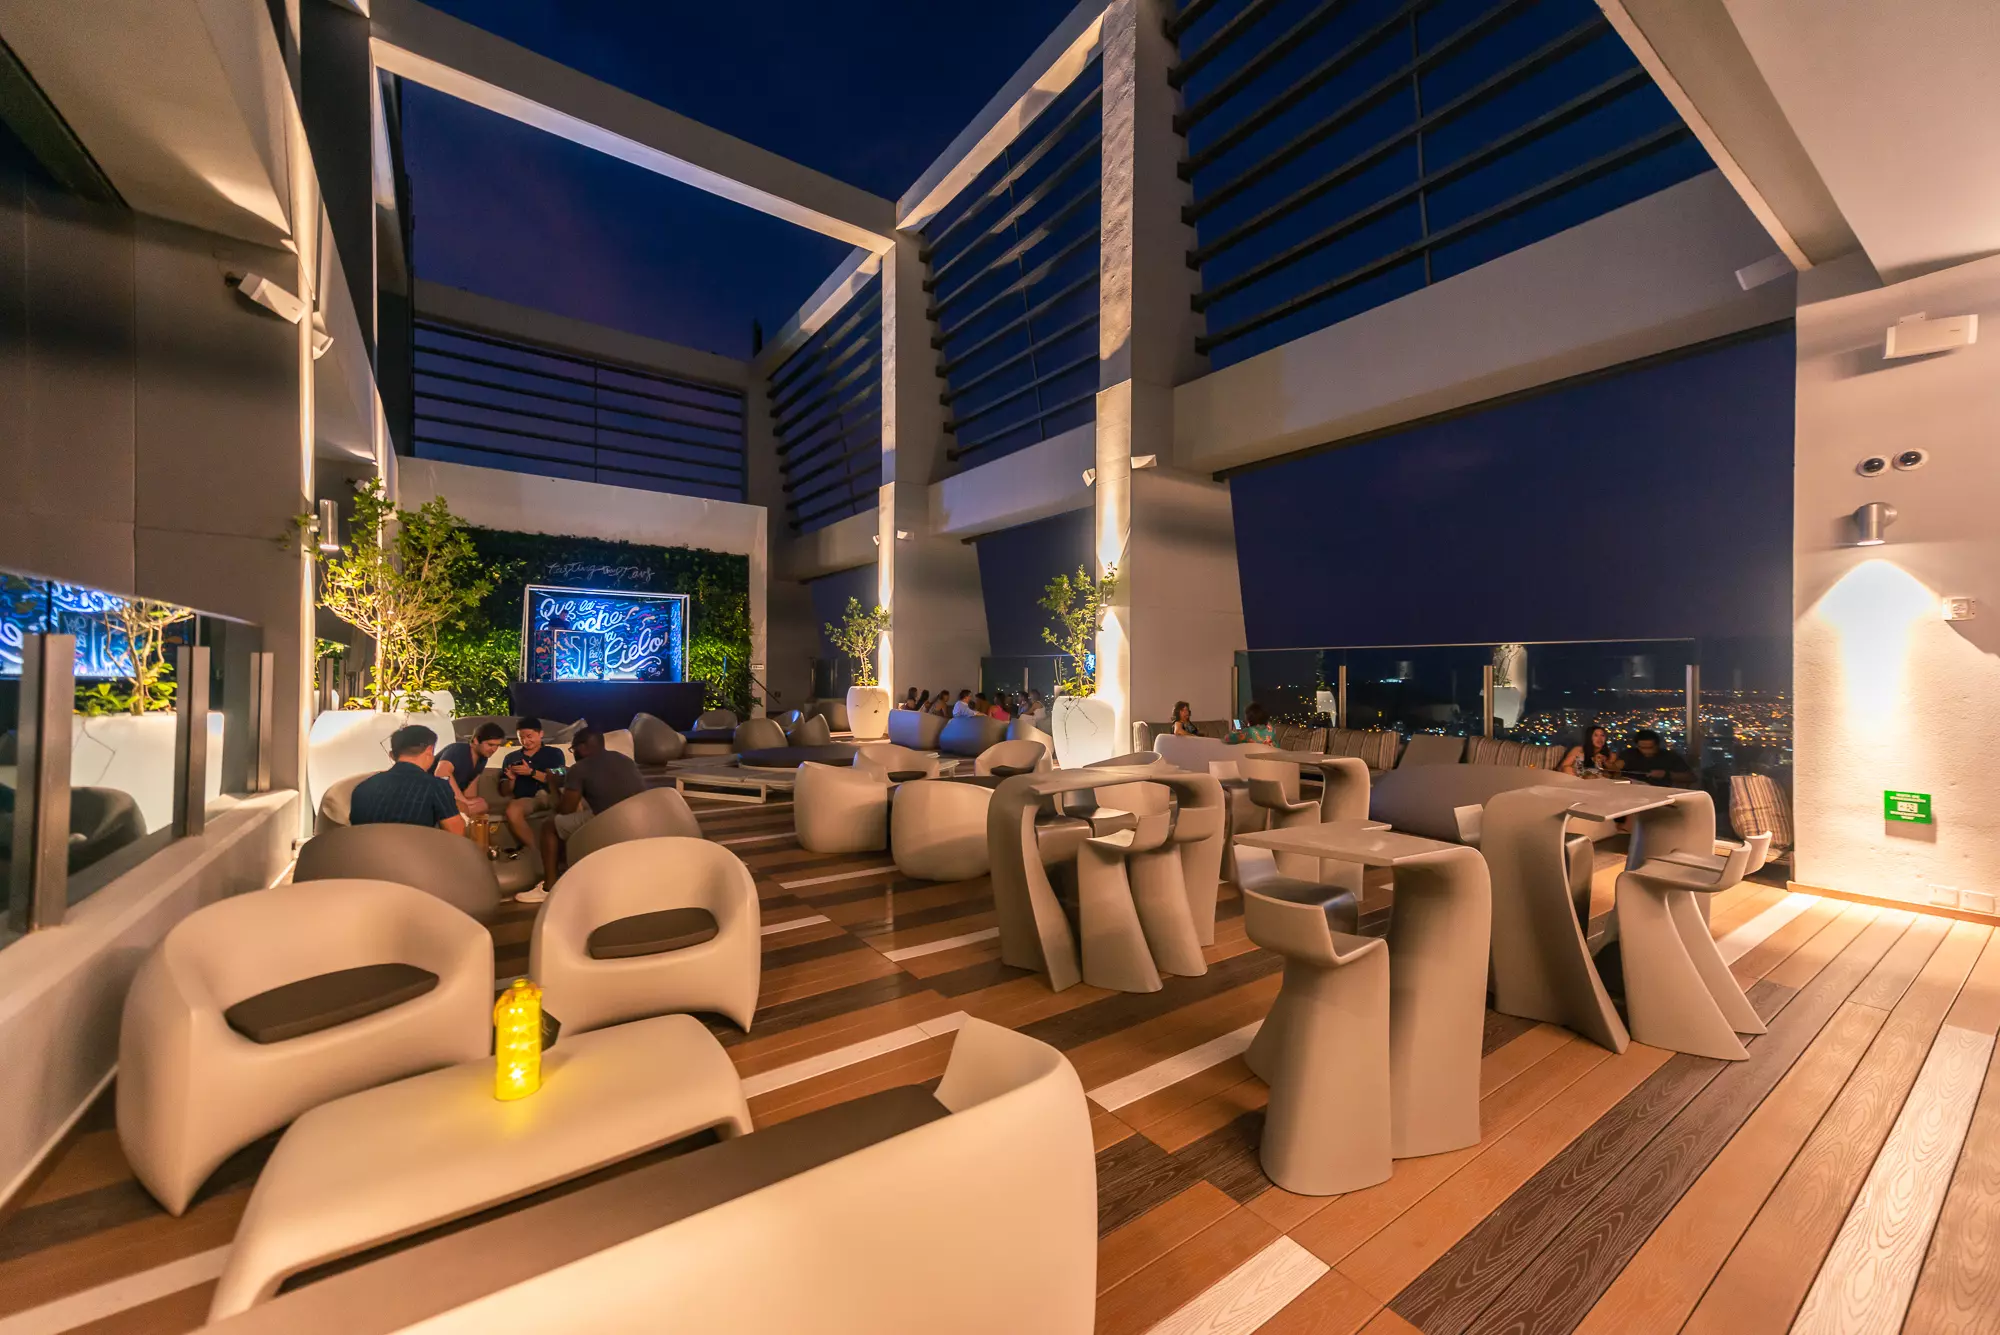 51 Sky Bar in Colombia, South America | Observation Decks,Bars - Rated 3.8